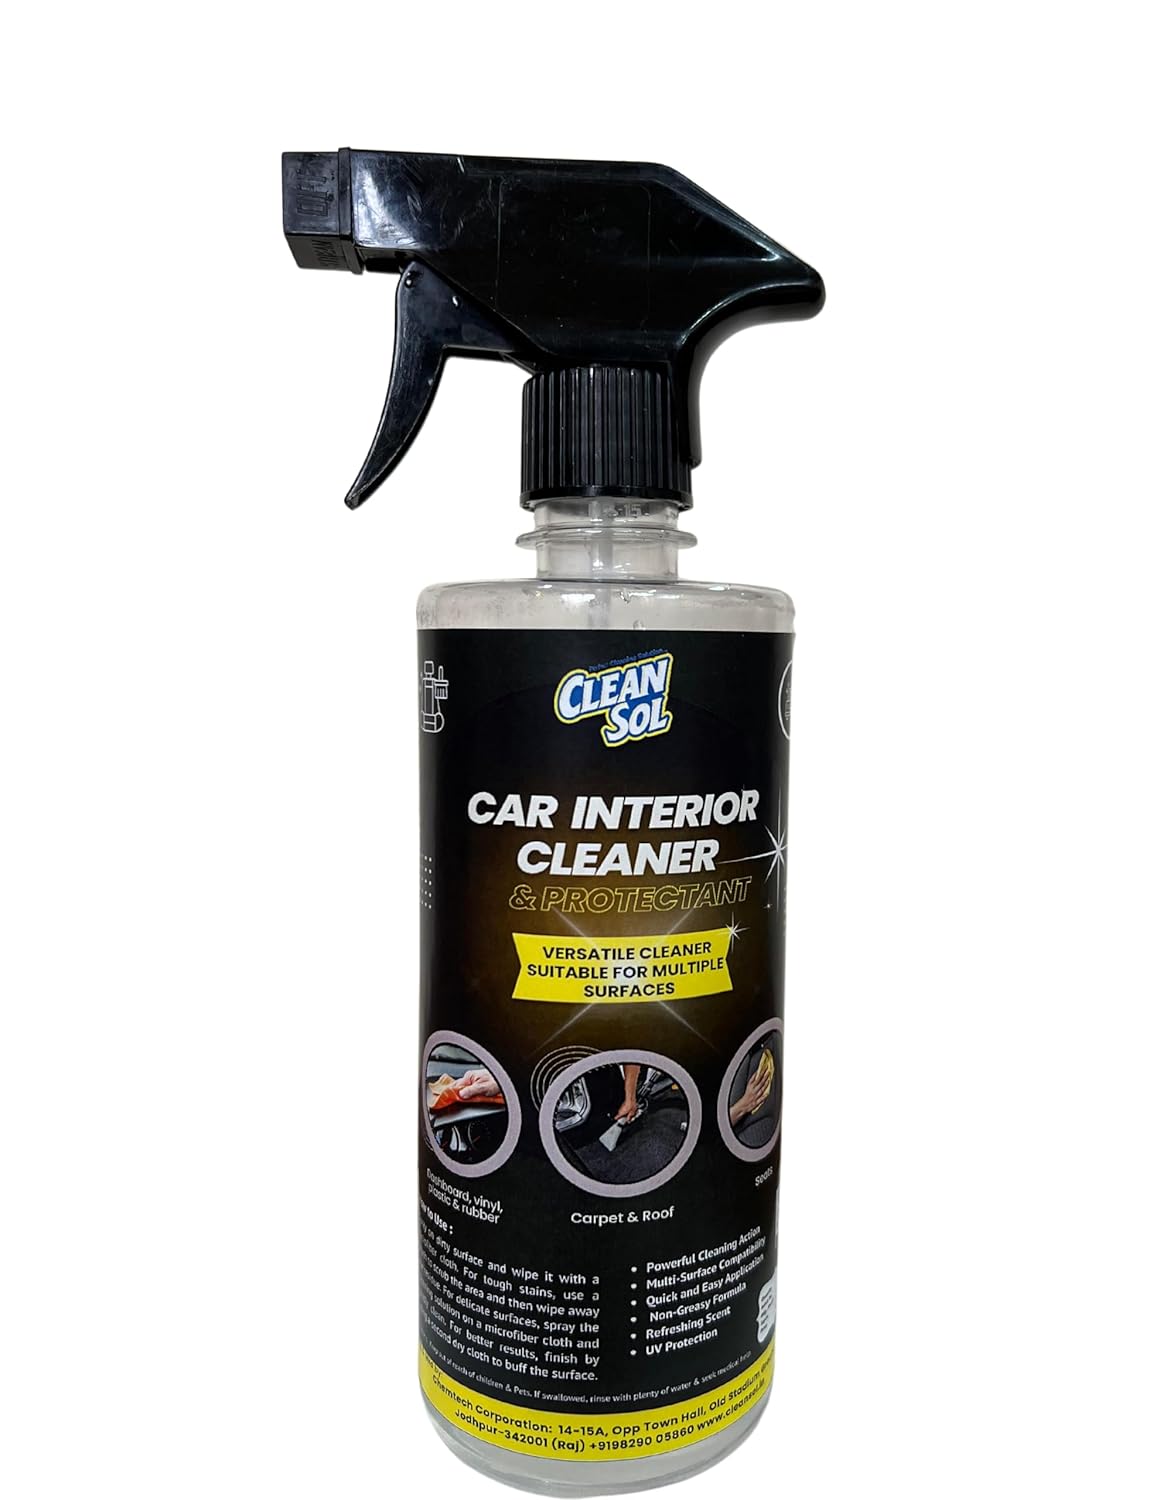 Cleansol Car Interior Cleaner and Protectant Spray- 400ML| for Dashboard, Car Seats, Door Panels and Roof | Fresh Lemon Fragrance